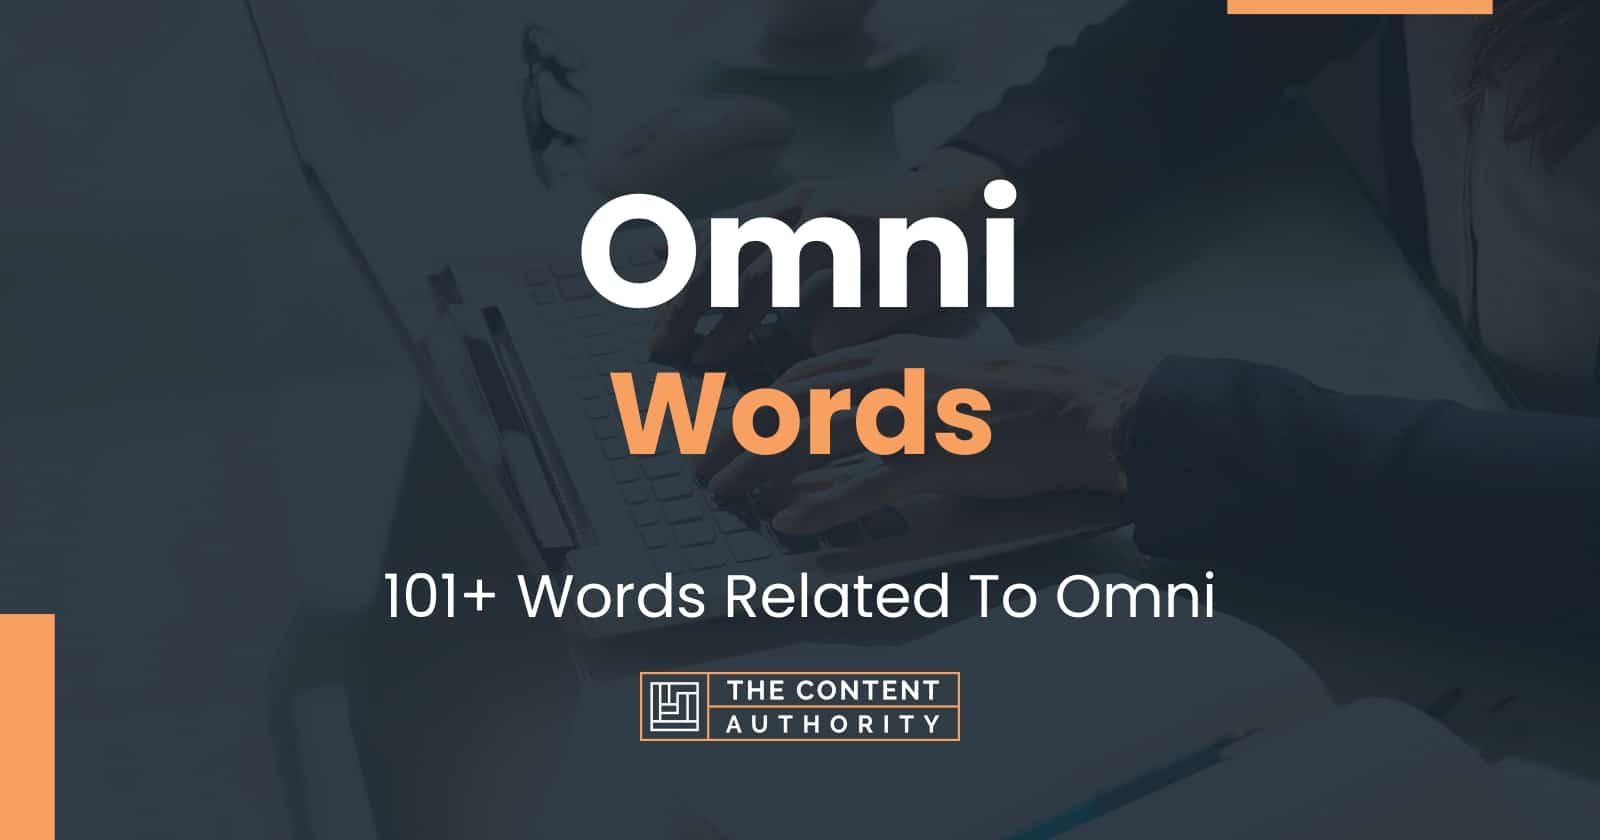 Omni Words - 101+ Words Related To Omni